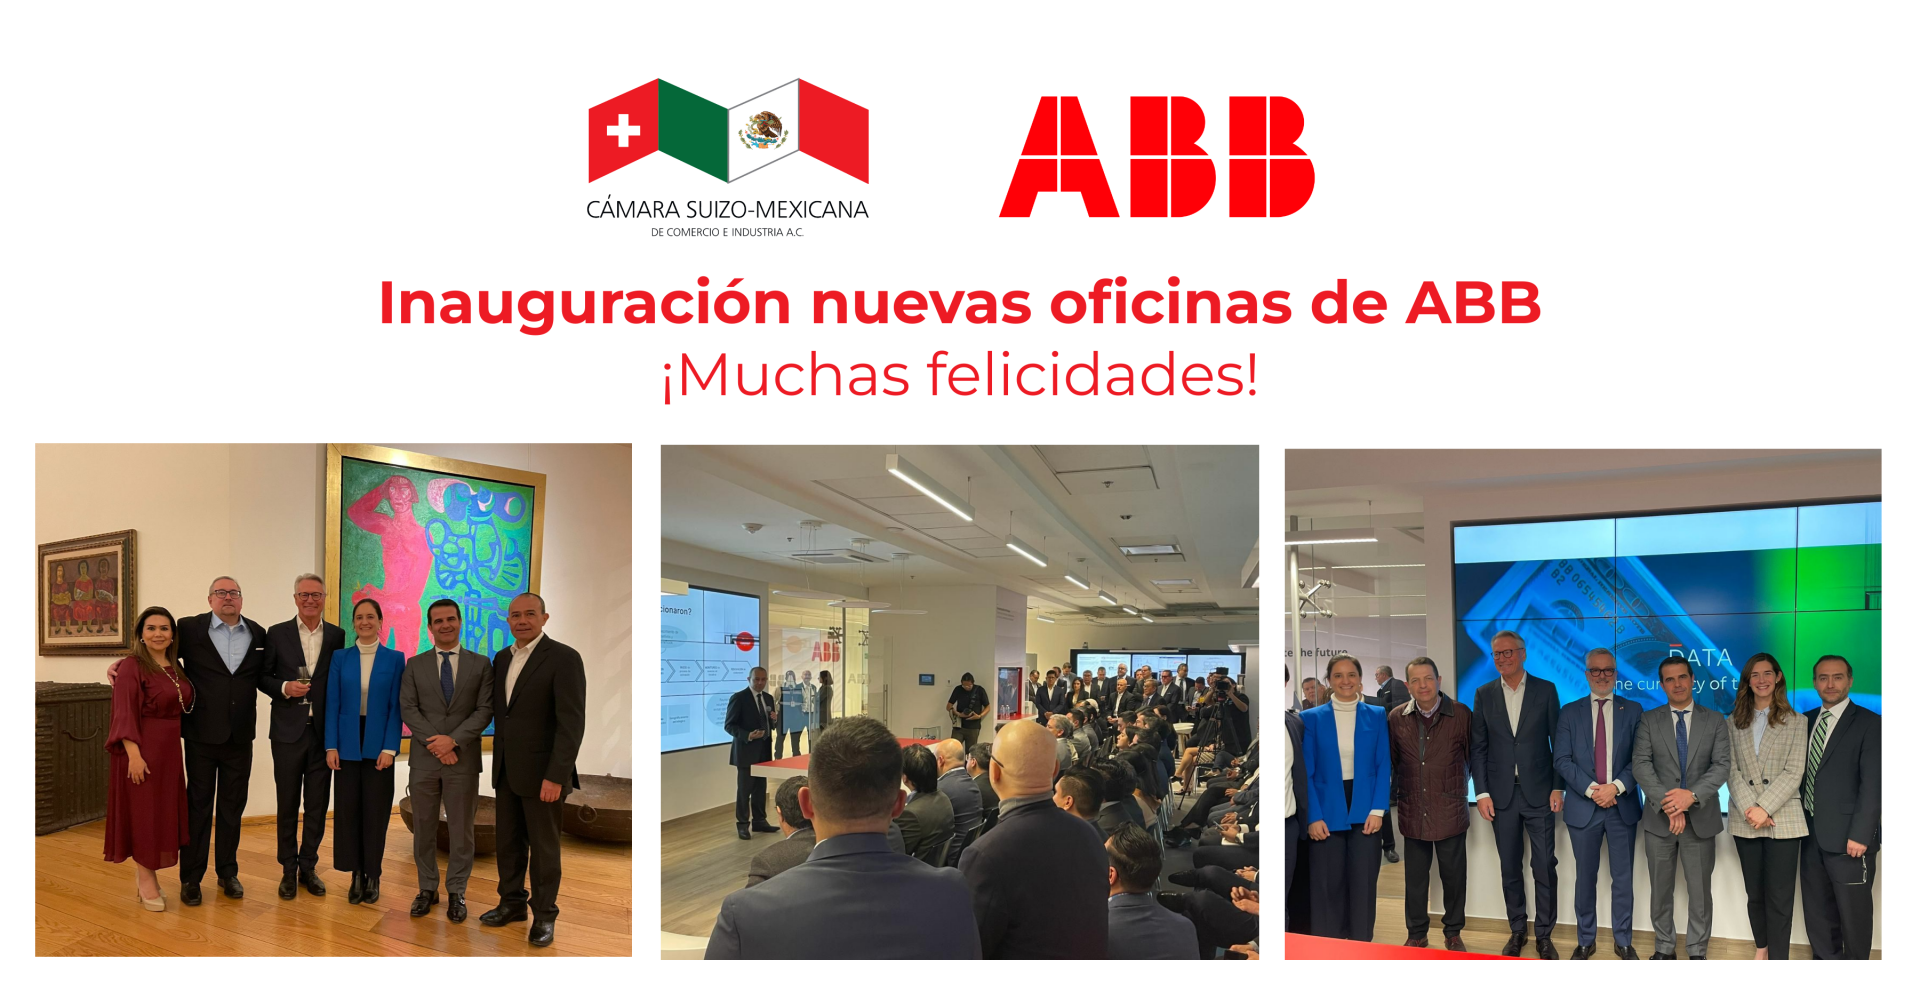 Inauguration of new ABB offices